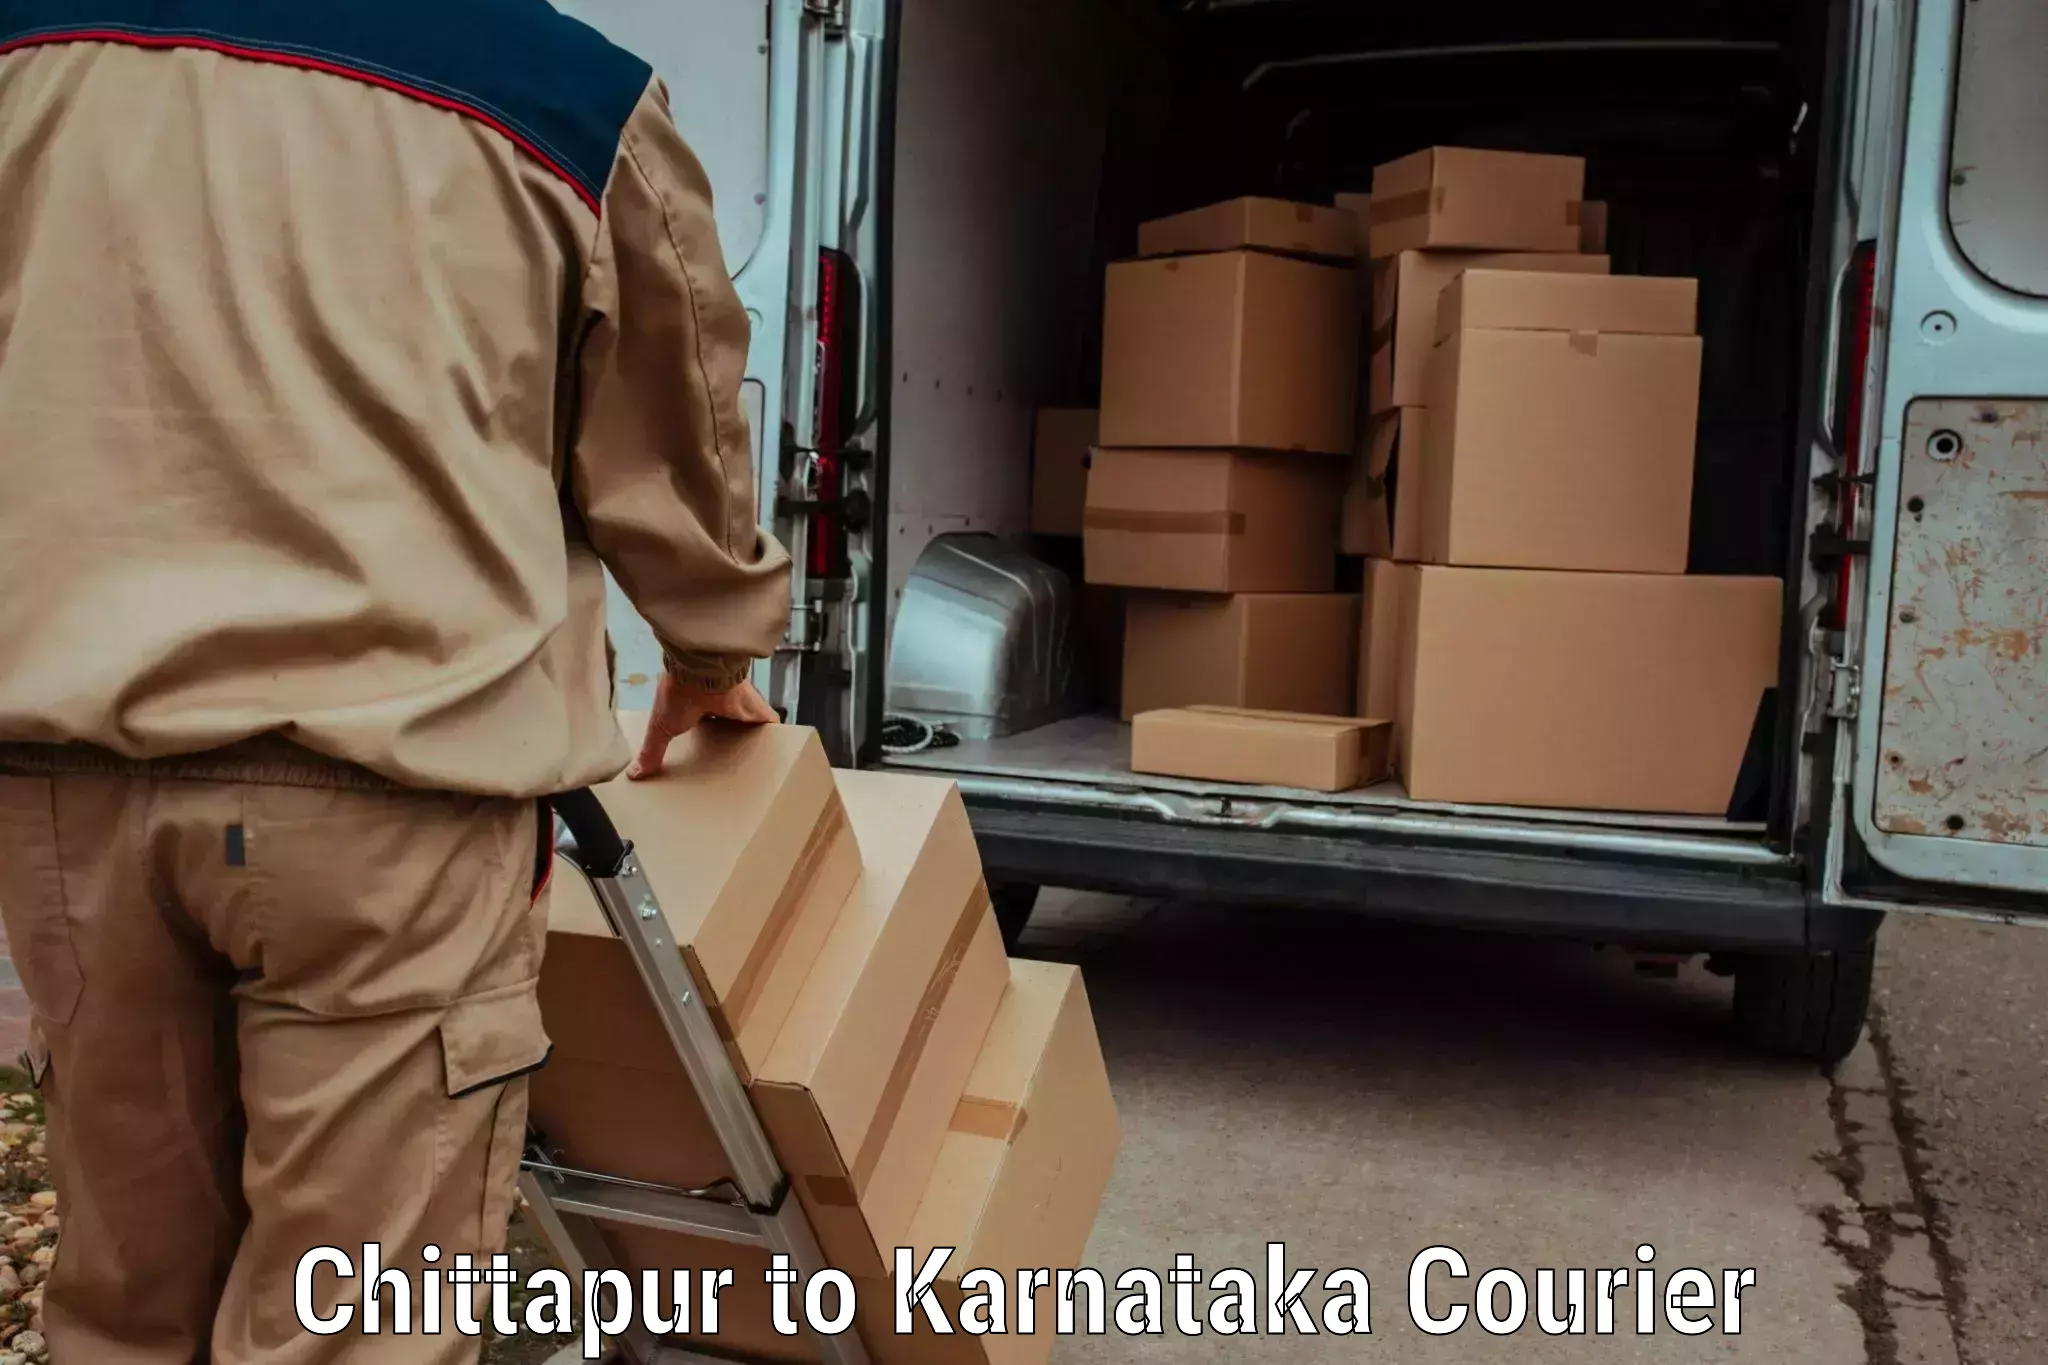 Express delivery capabilities Chittapur to Hoovina Hadagali